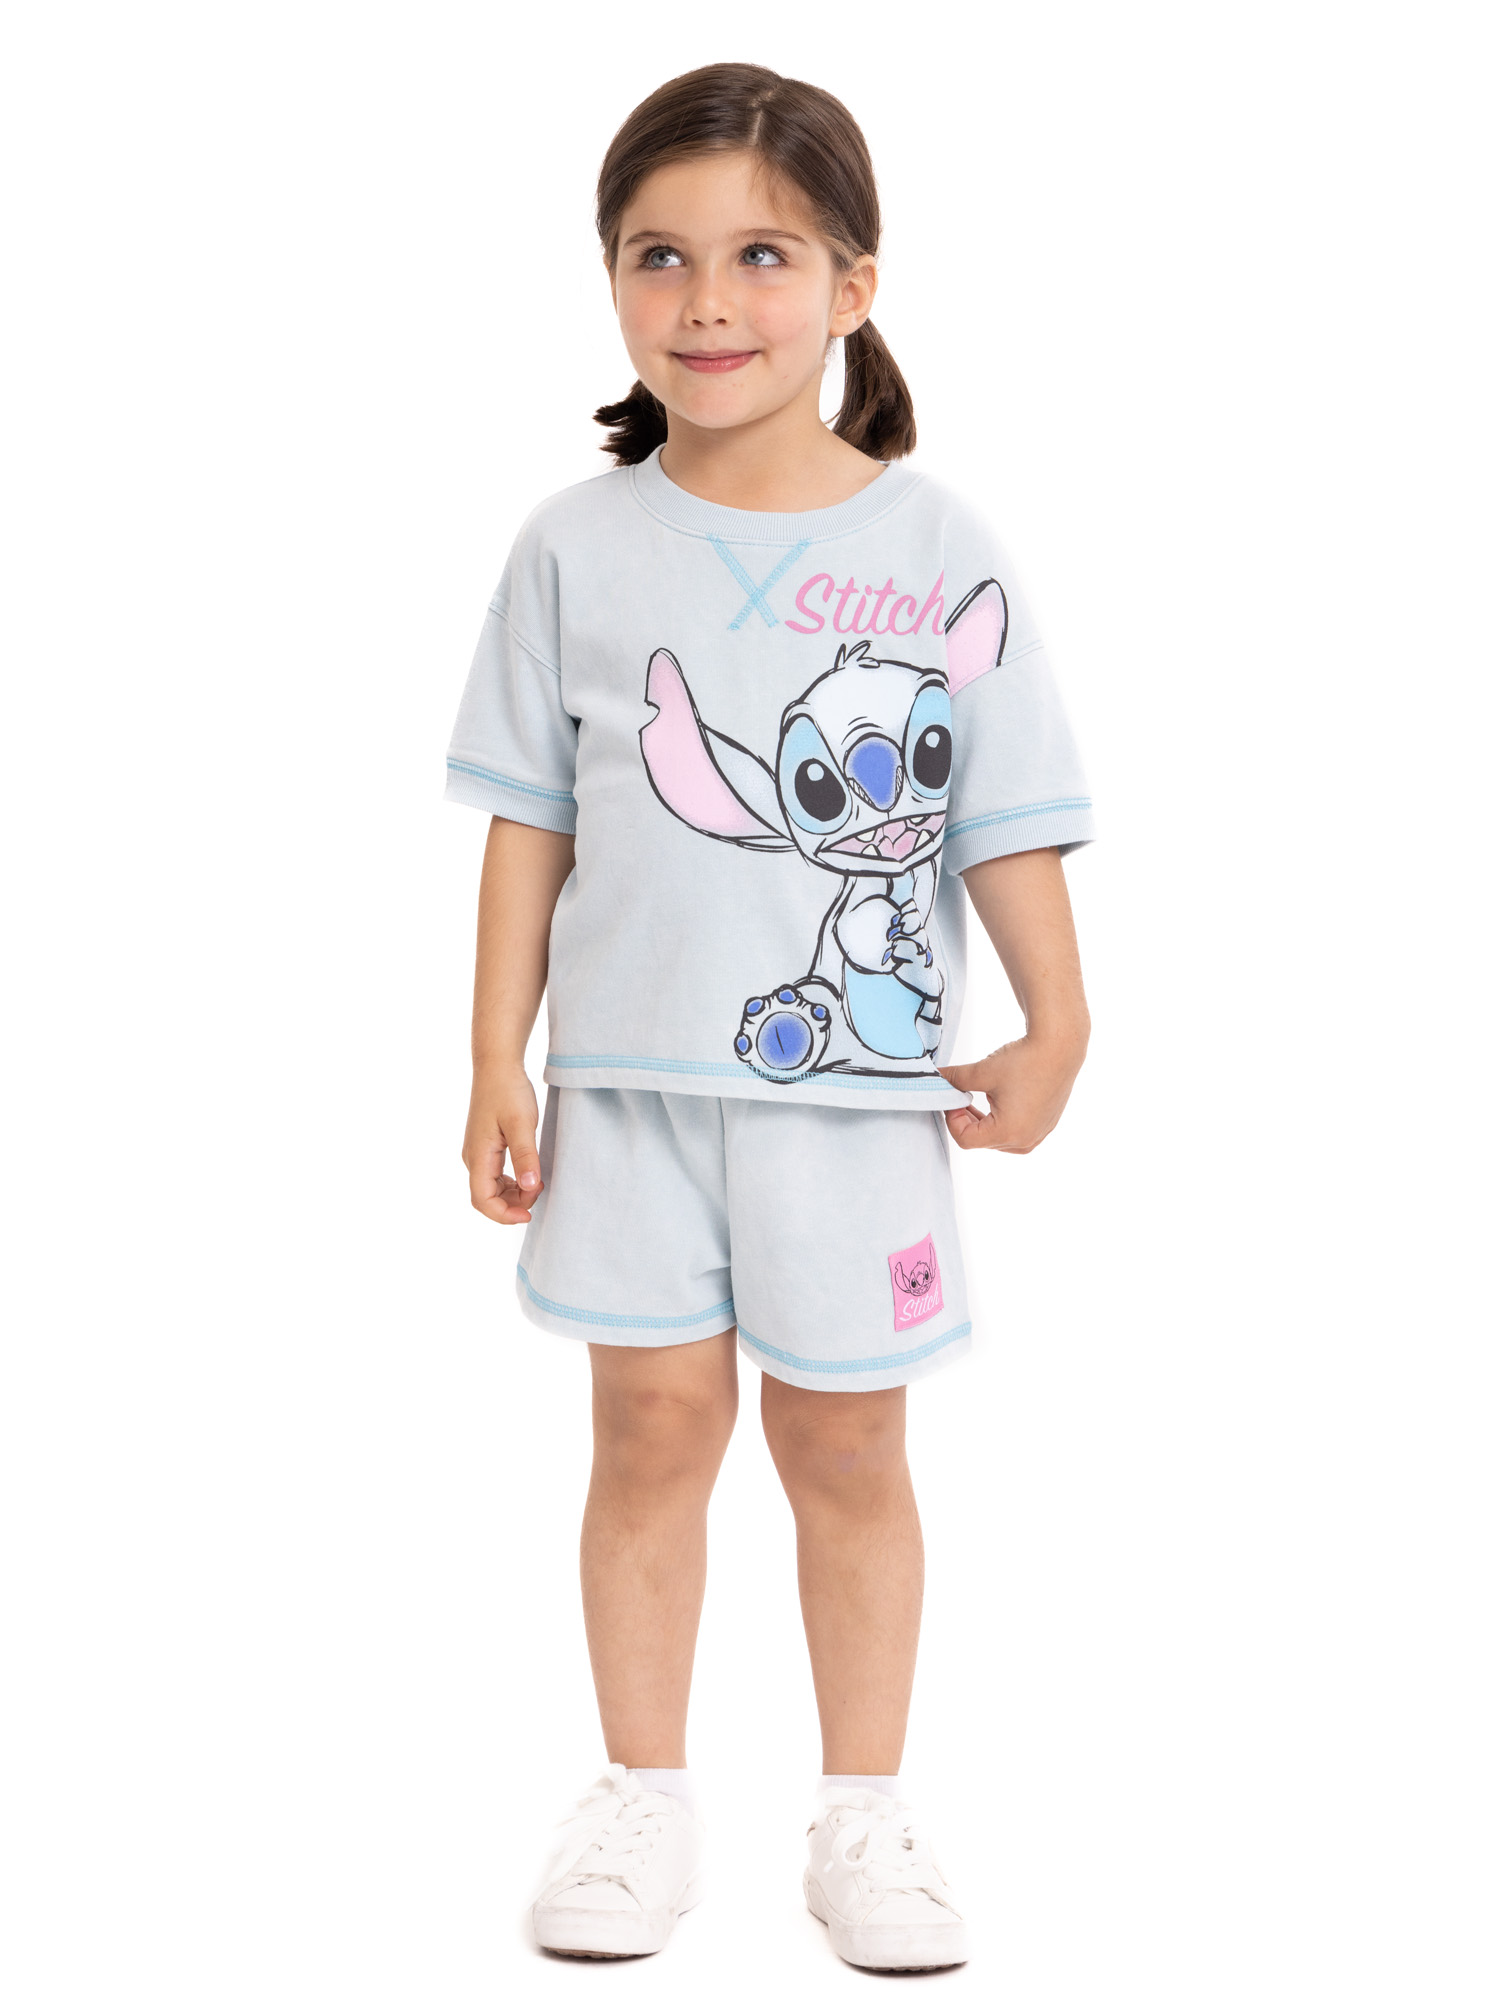 Lilo & Stitch Toddler Girls Tee and Shorts Set, 2-Piece, Sizes 12M-5T - image 1 of 10